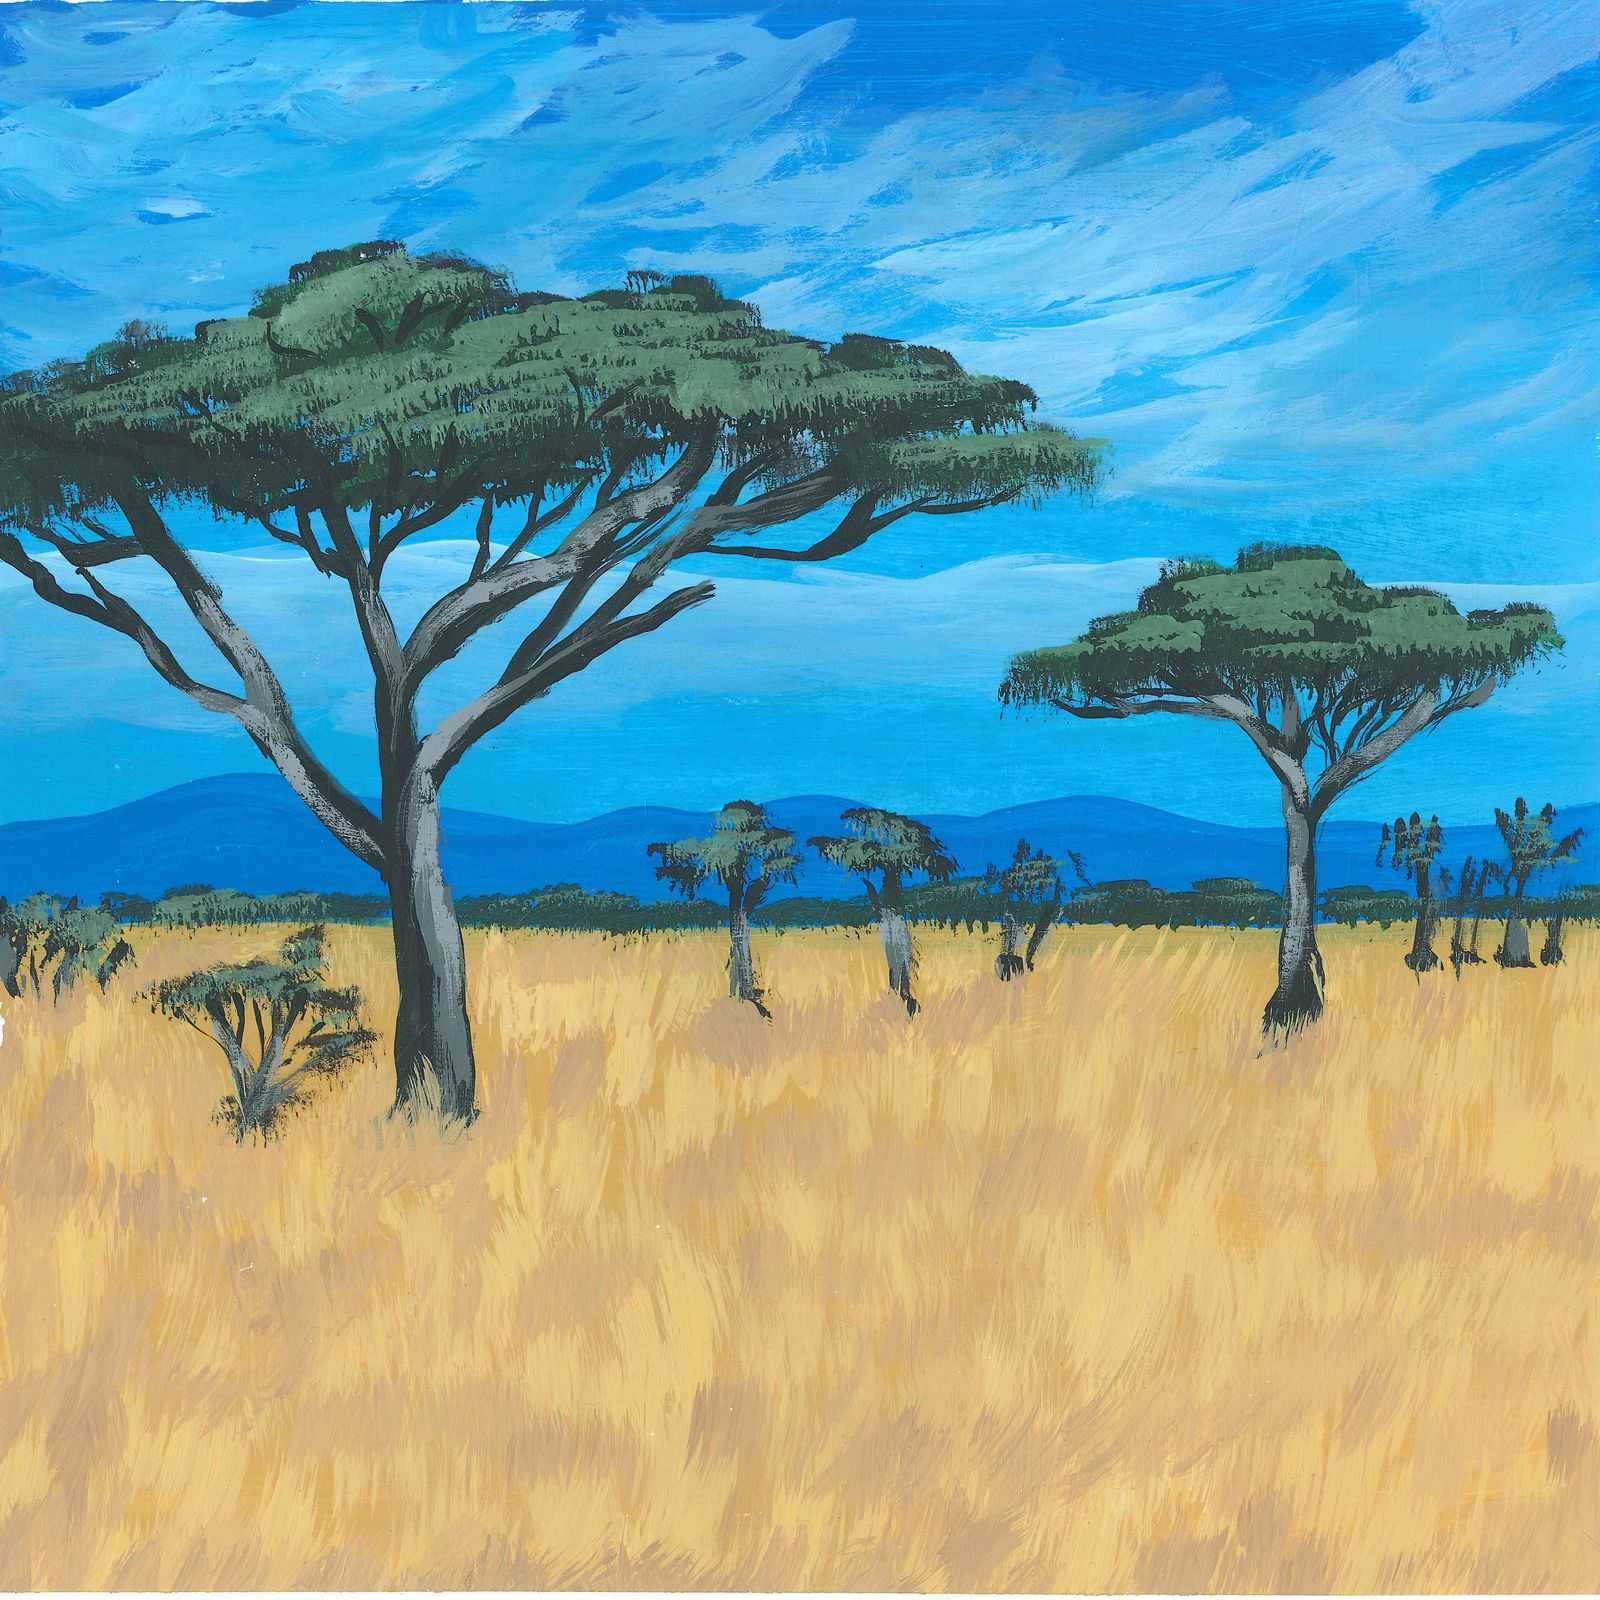 Beautiful birdsong in the African savanna - nature landscape painting - earth.fm